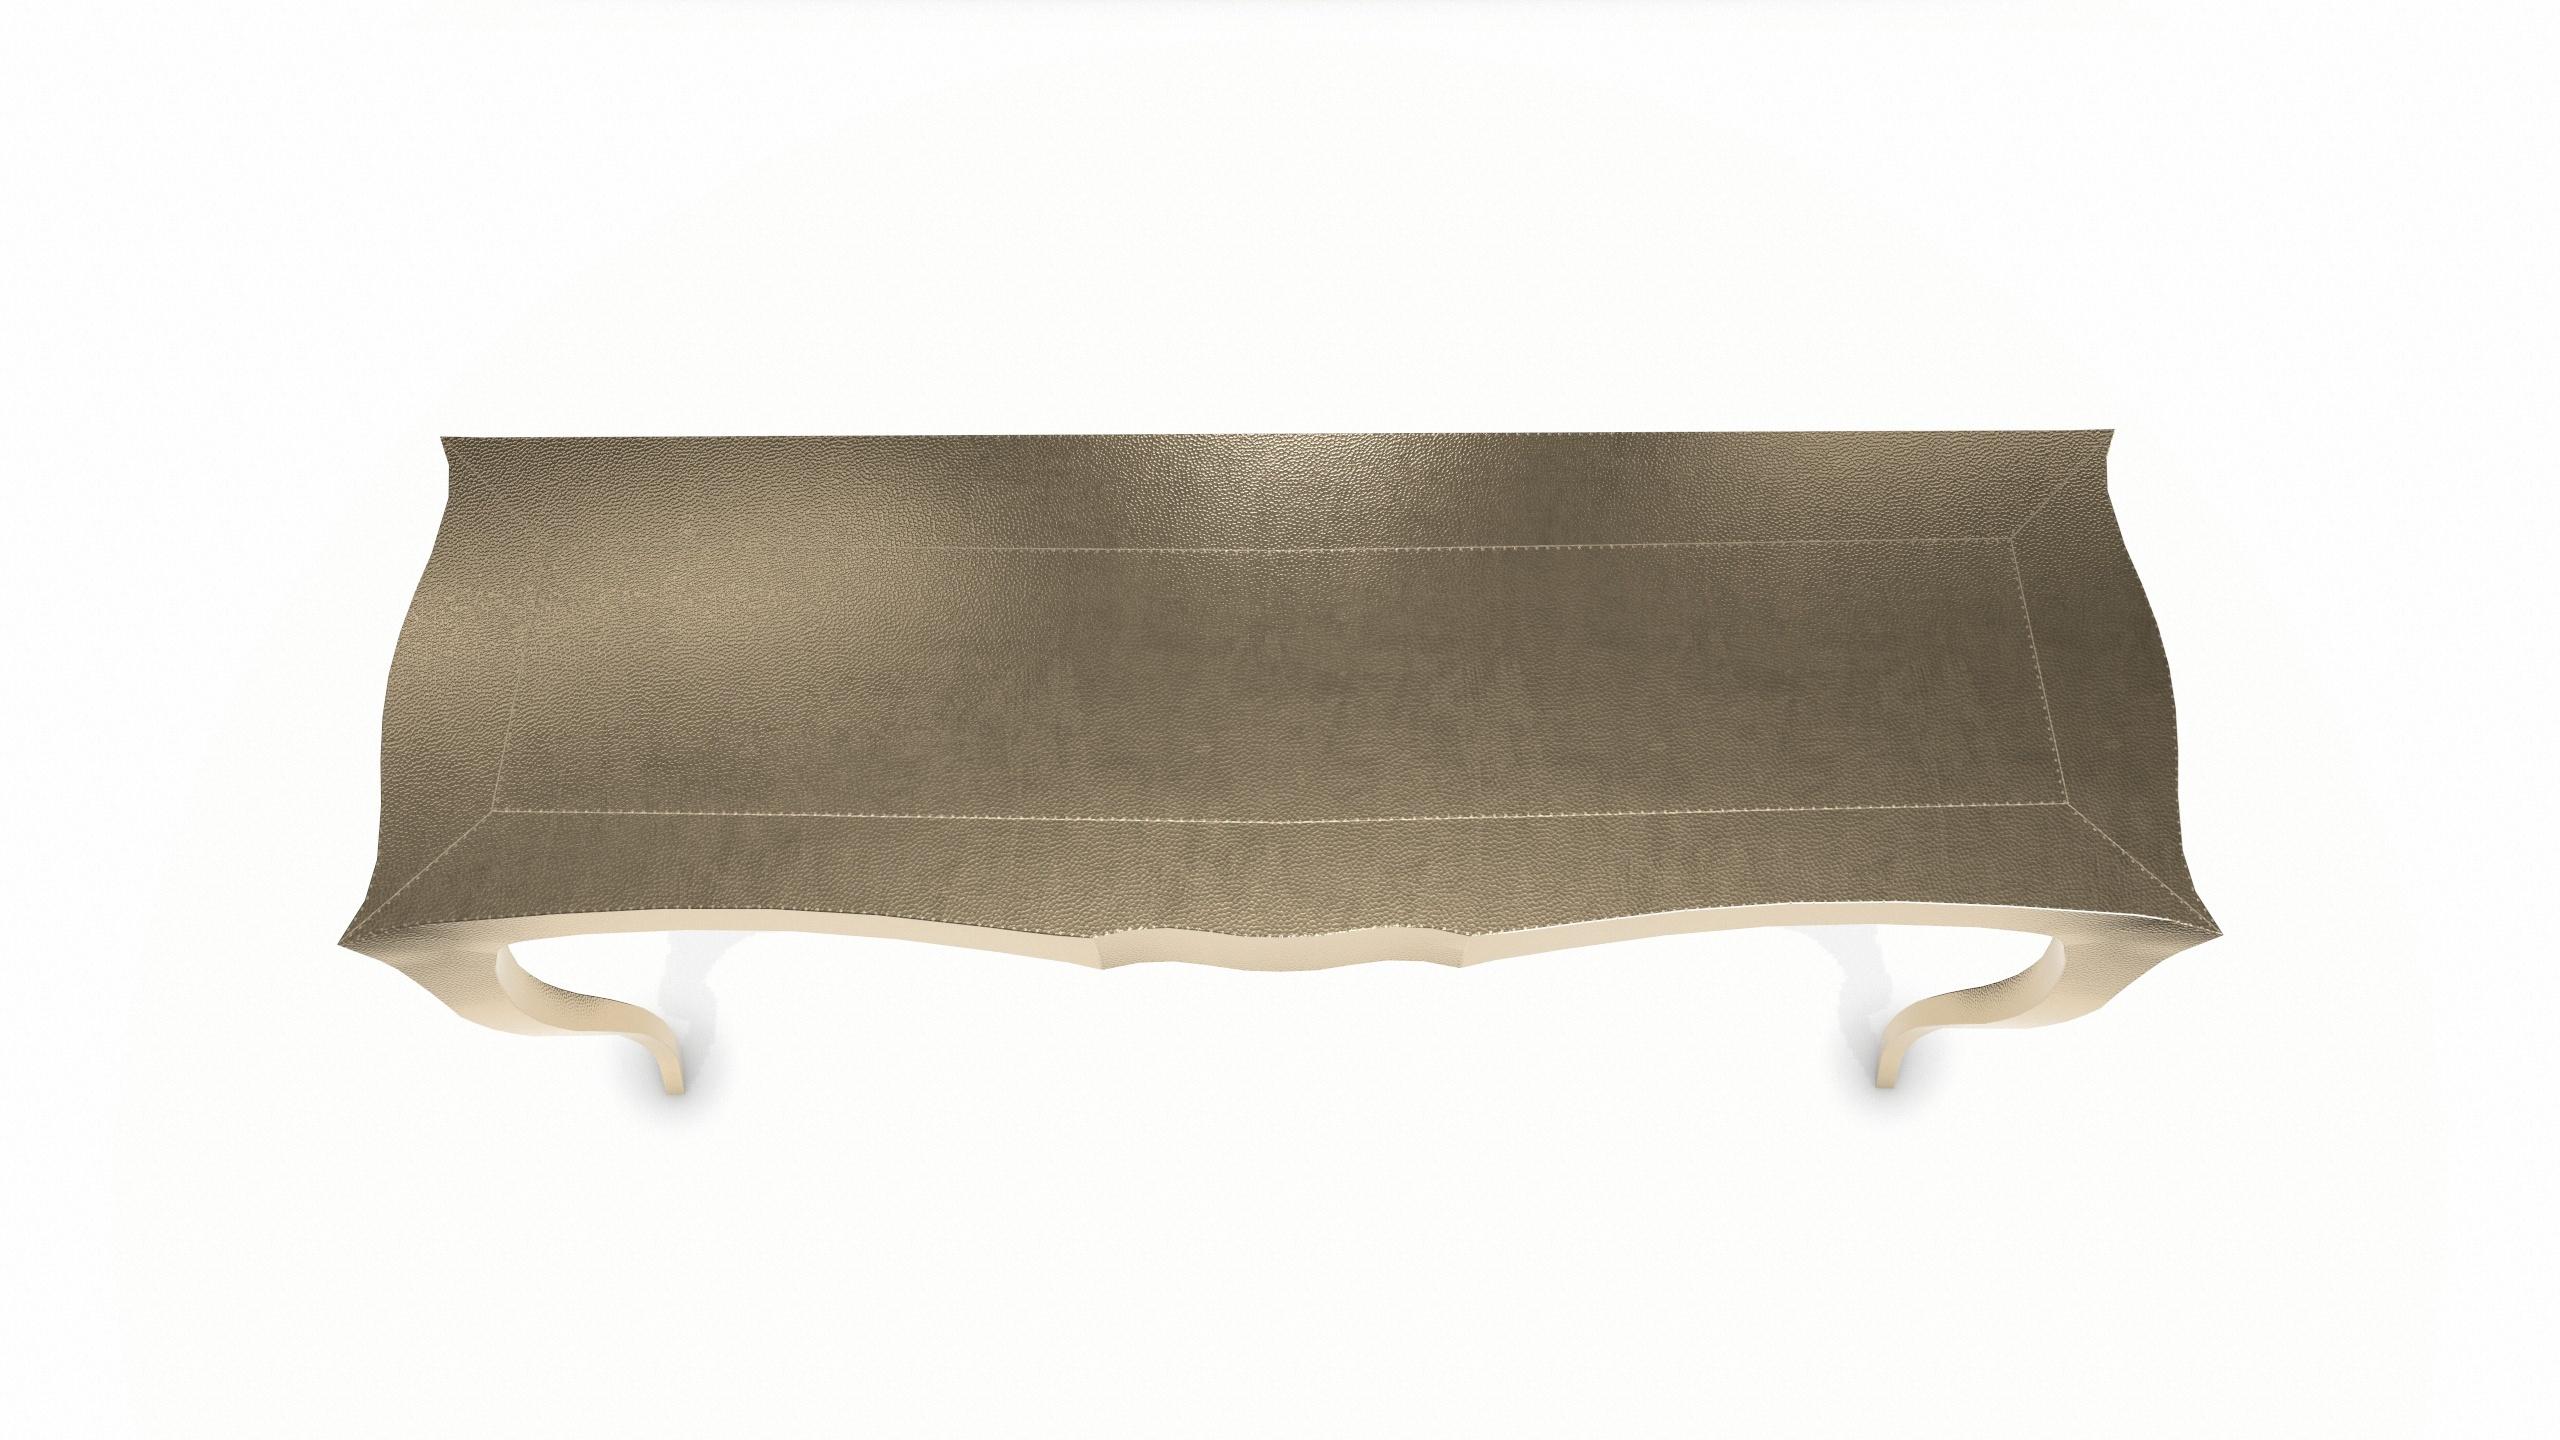 Louise Console Table from our Louise Collection. The renowned designer Paul Mathieu chose the name “Louise” when he created his more feminine version of Louis XV (1730-1760) furniture. The characteristic cabriole leg, curving outward at the knee and